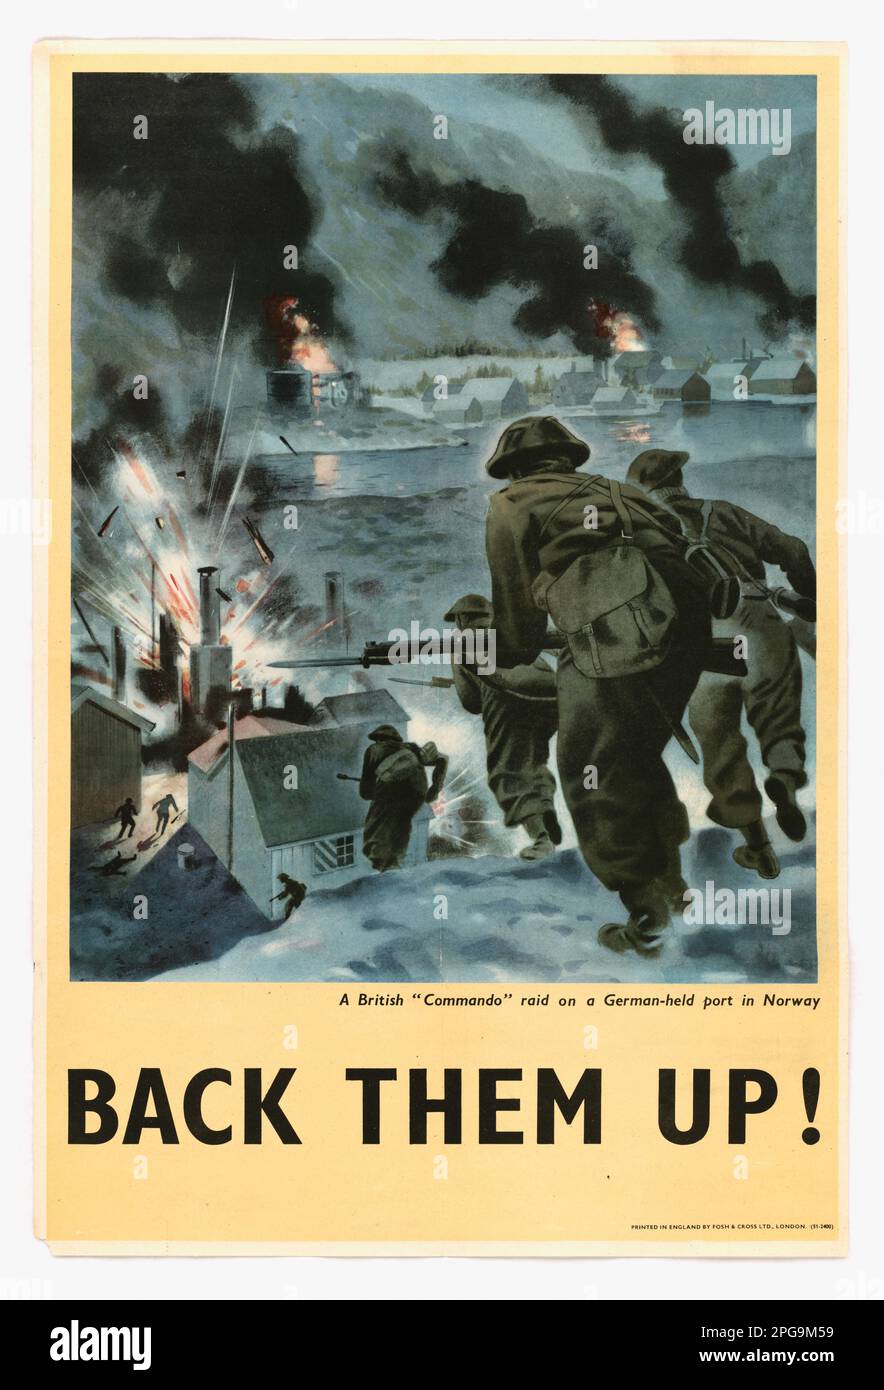 A British ' Commando' Raid on a German-Held Port in Norway - Back Them Up!. Country: England Printed By: Fosh & Cross Ltd.. 1942 - 1945.  Office for Emergency Management. Office of War Information. Domestic Operations Branch. Bureau of Special Services. 3/9/1943-9/15/1945. World War II Foreign Posters Stock Photo